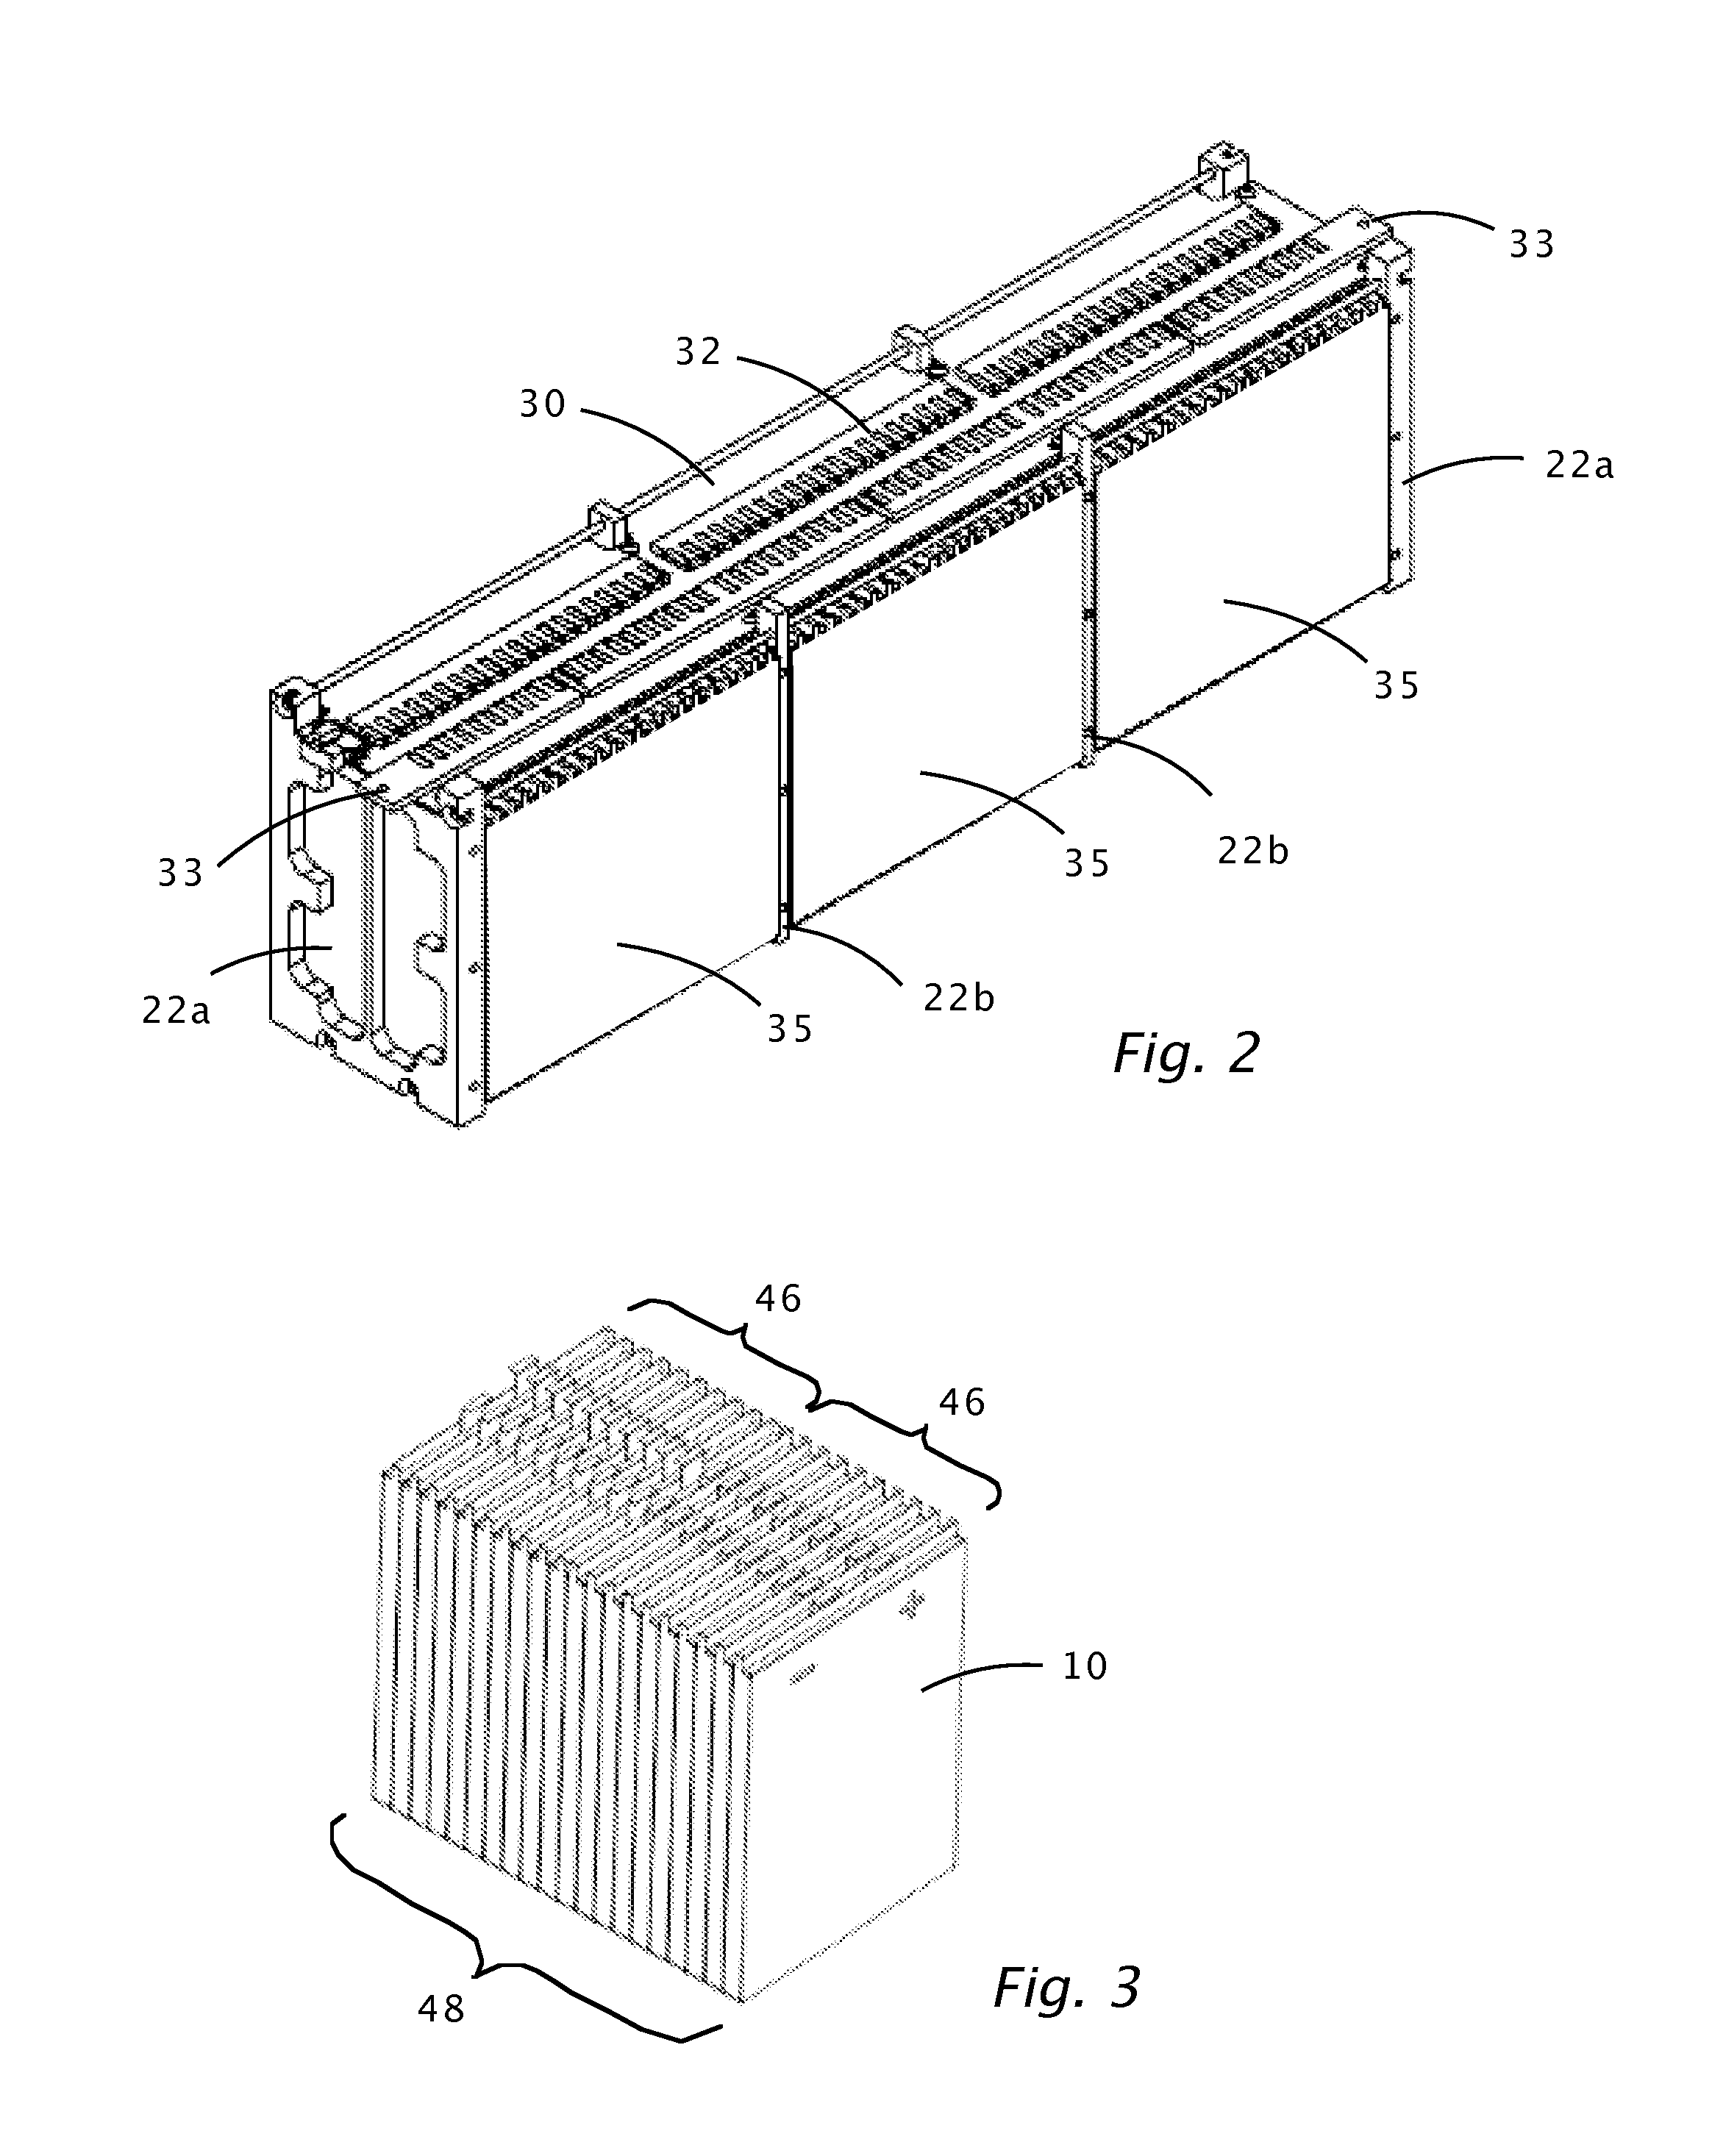 Low profile battery module and improved thermal interface